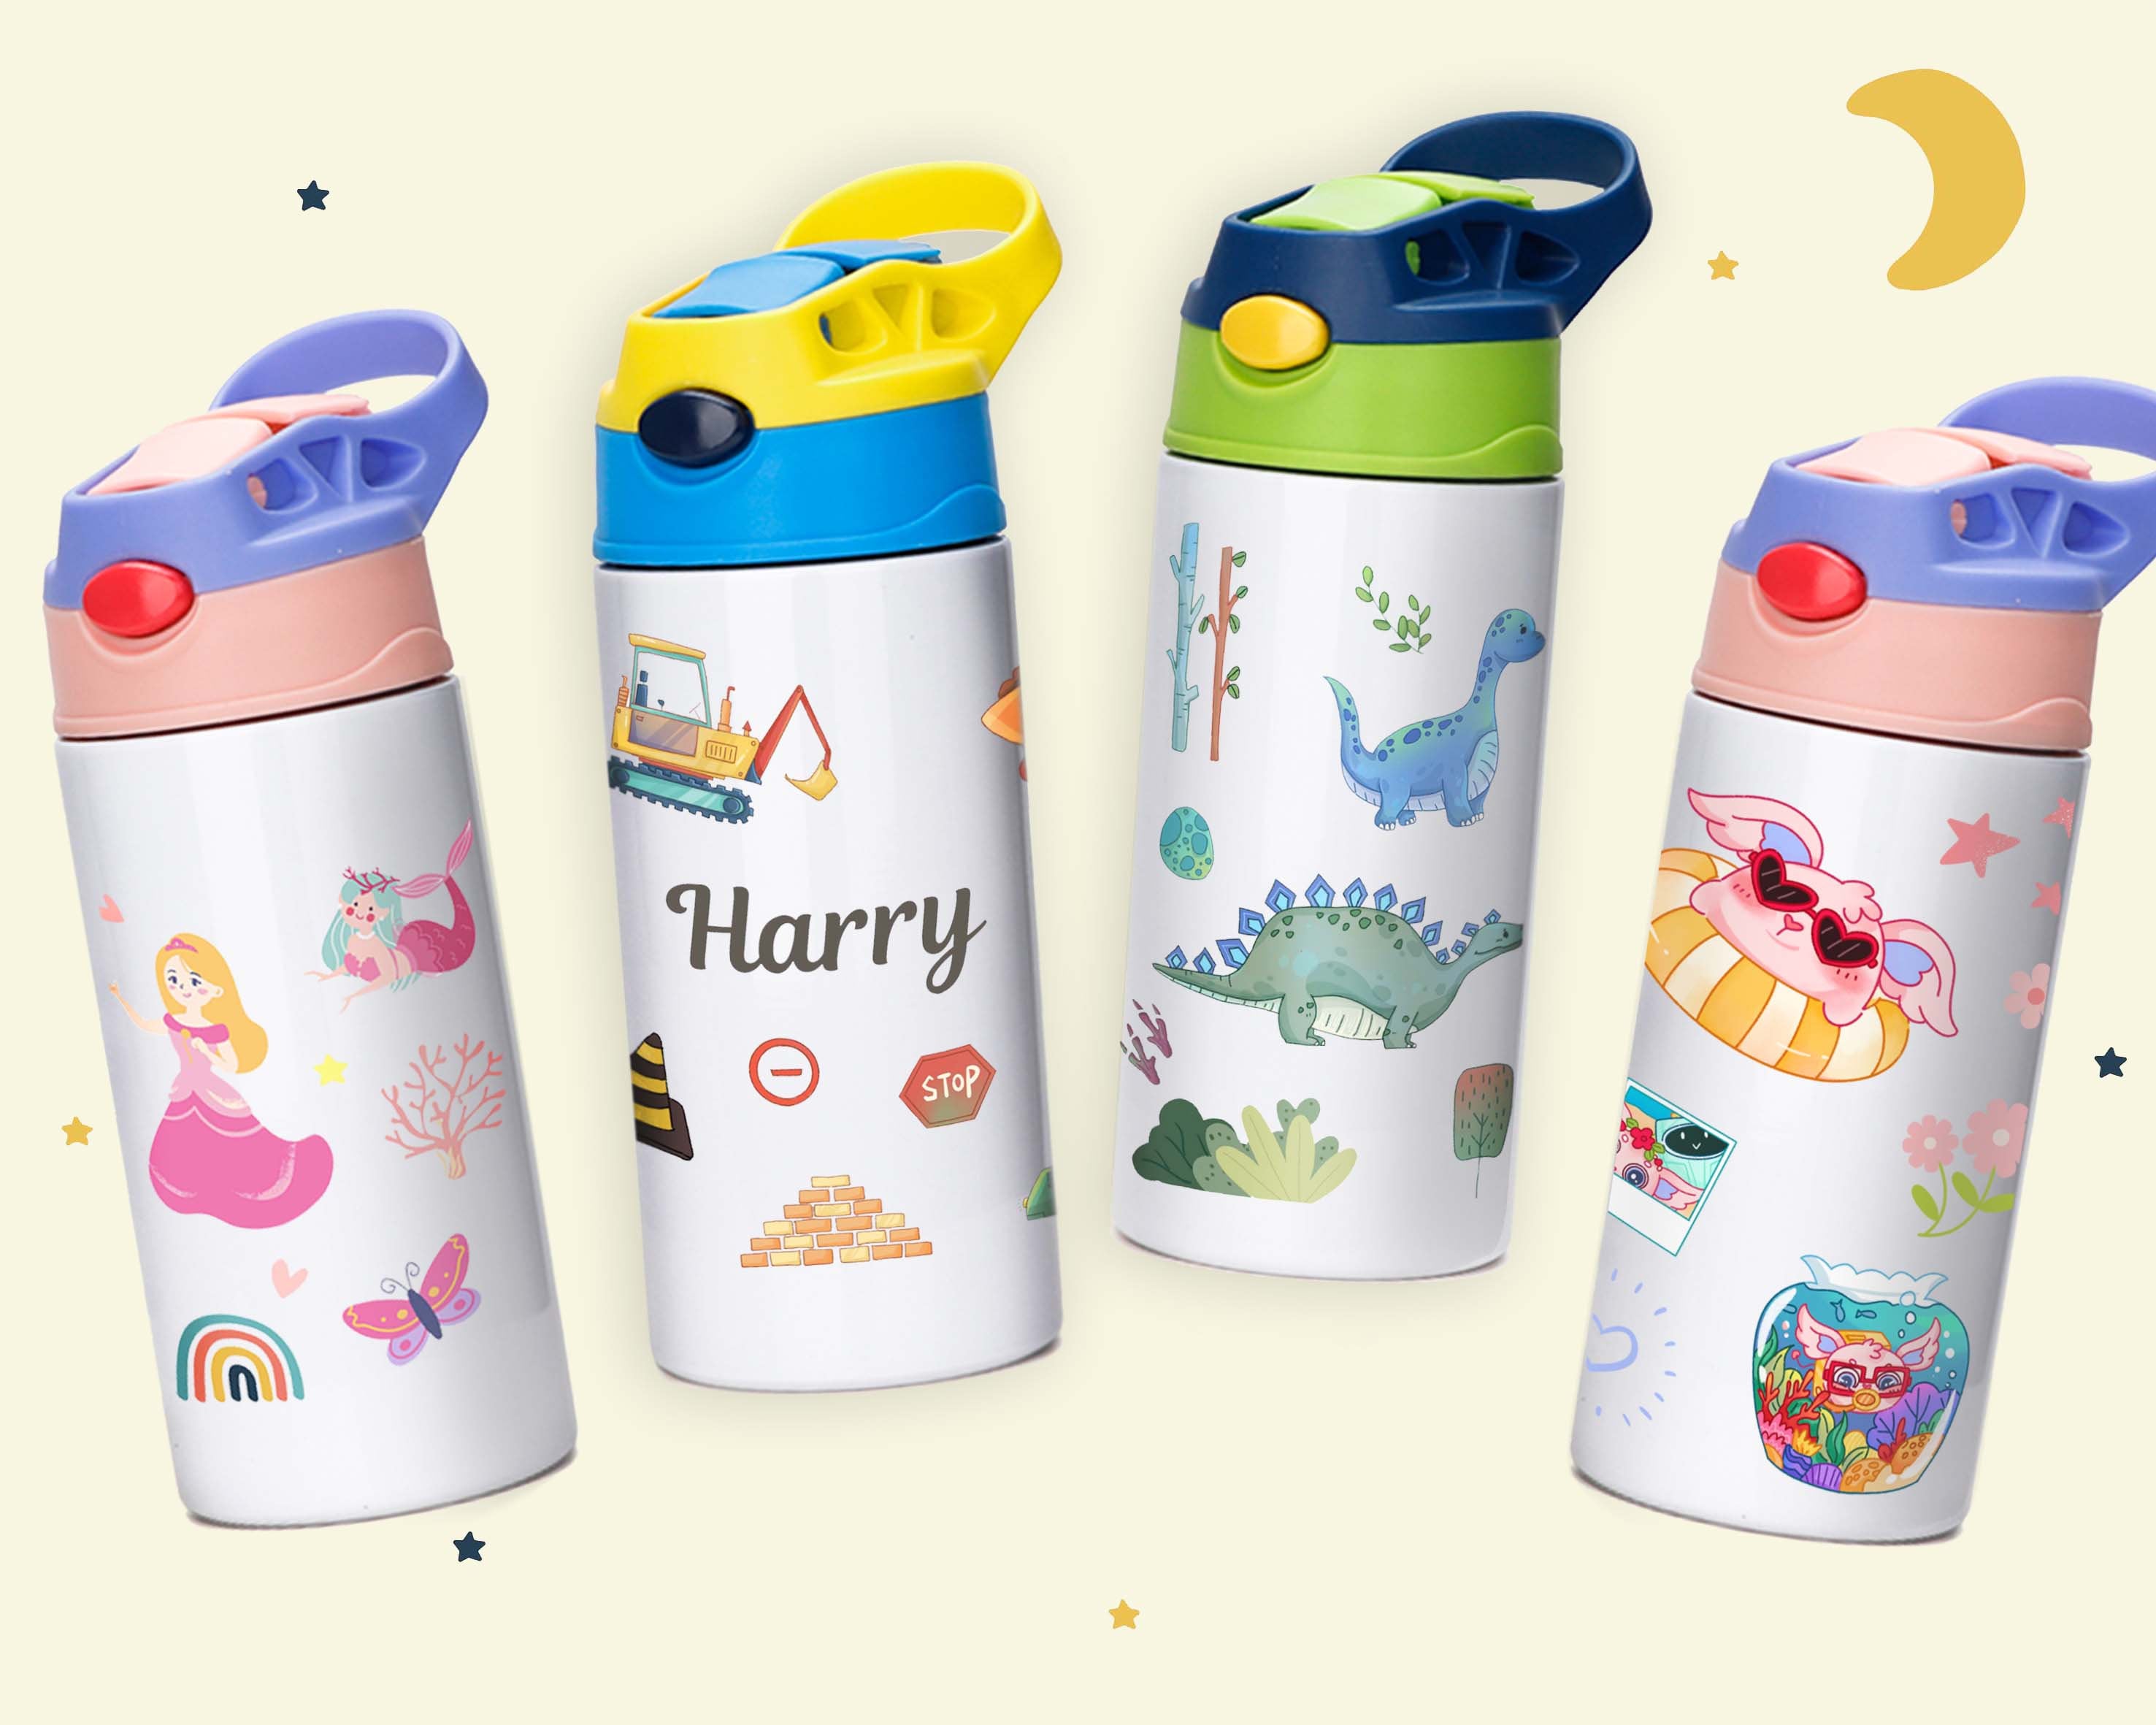 Back to School Kids Thermos, Pink Girls Thermos, Back to School Gift, Girls  Cup, Pink Sippy Cup 